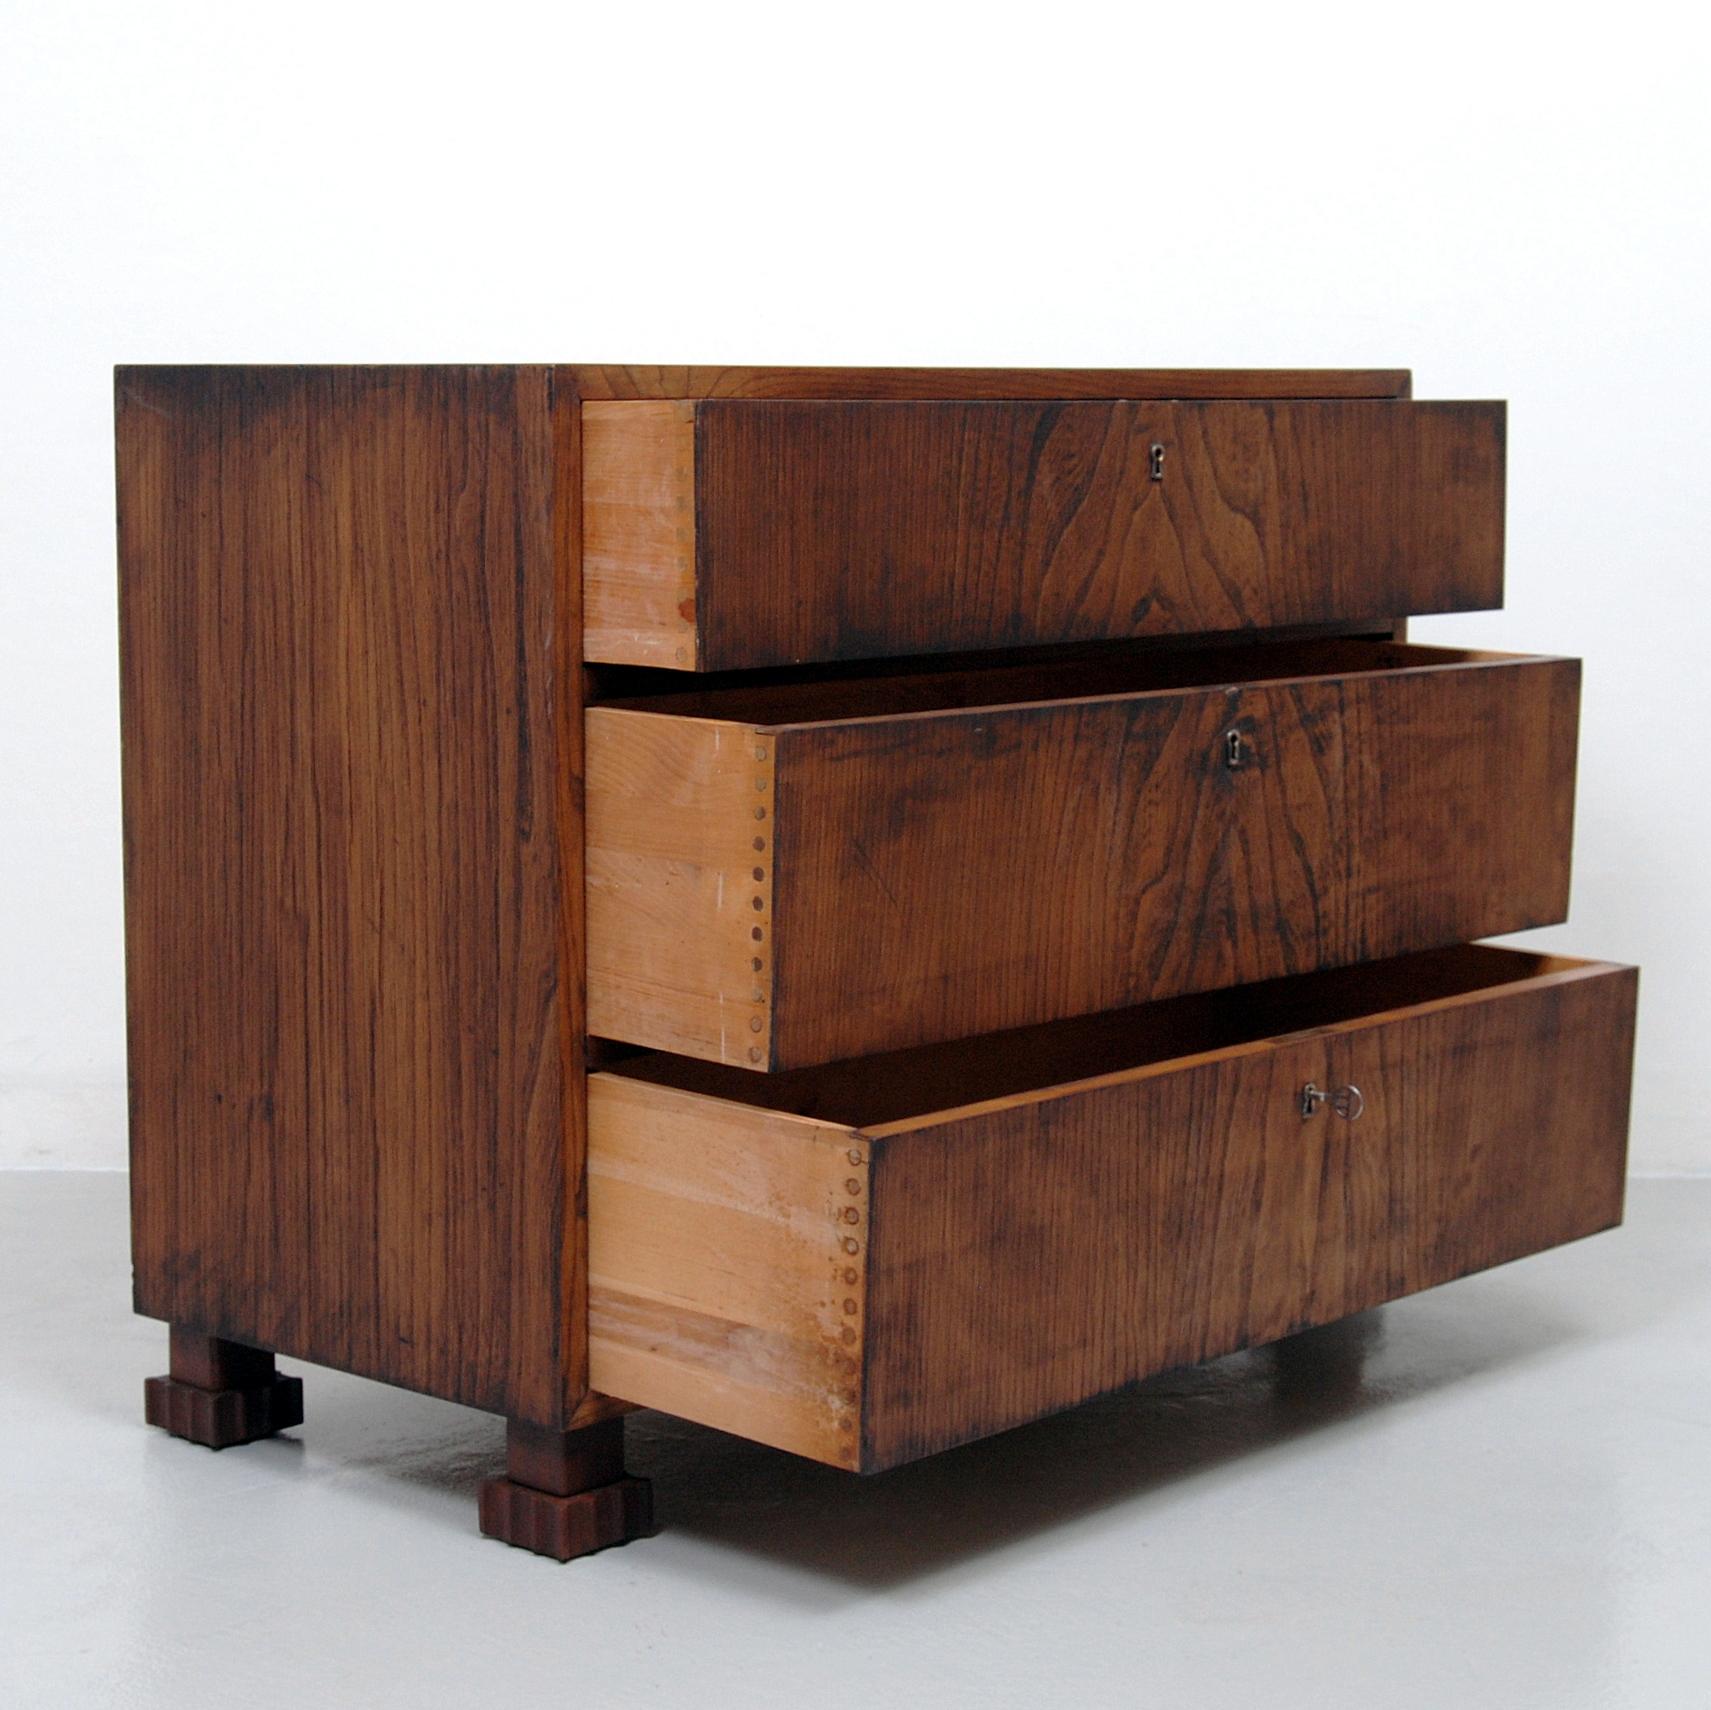 Chest of drawers in the Style of Axel Einar Hjorth, 1940s (Mitte des 20. Jahrhunderts)